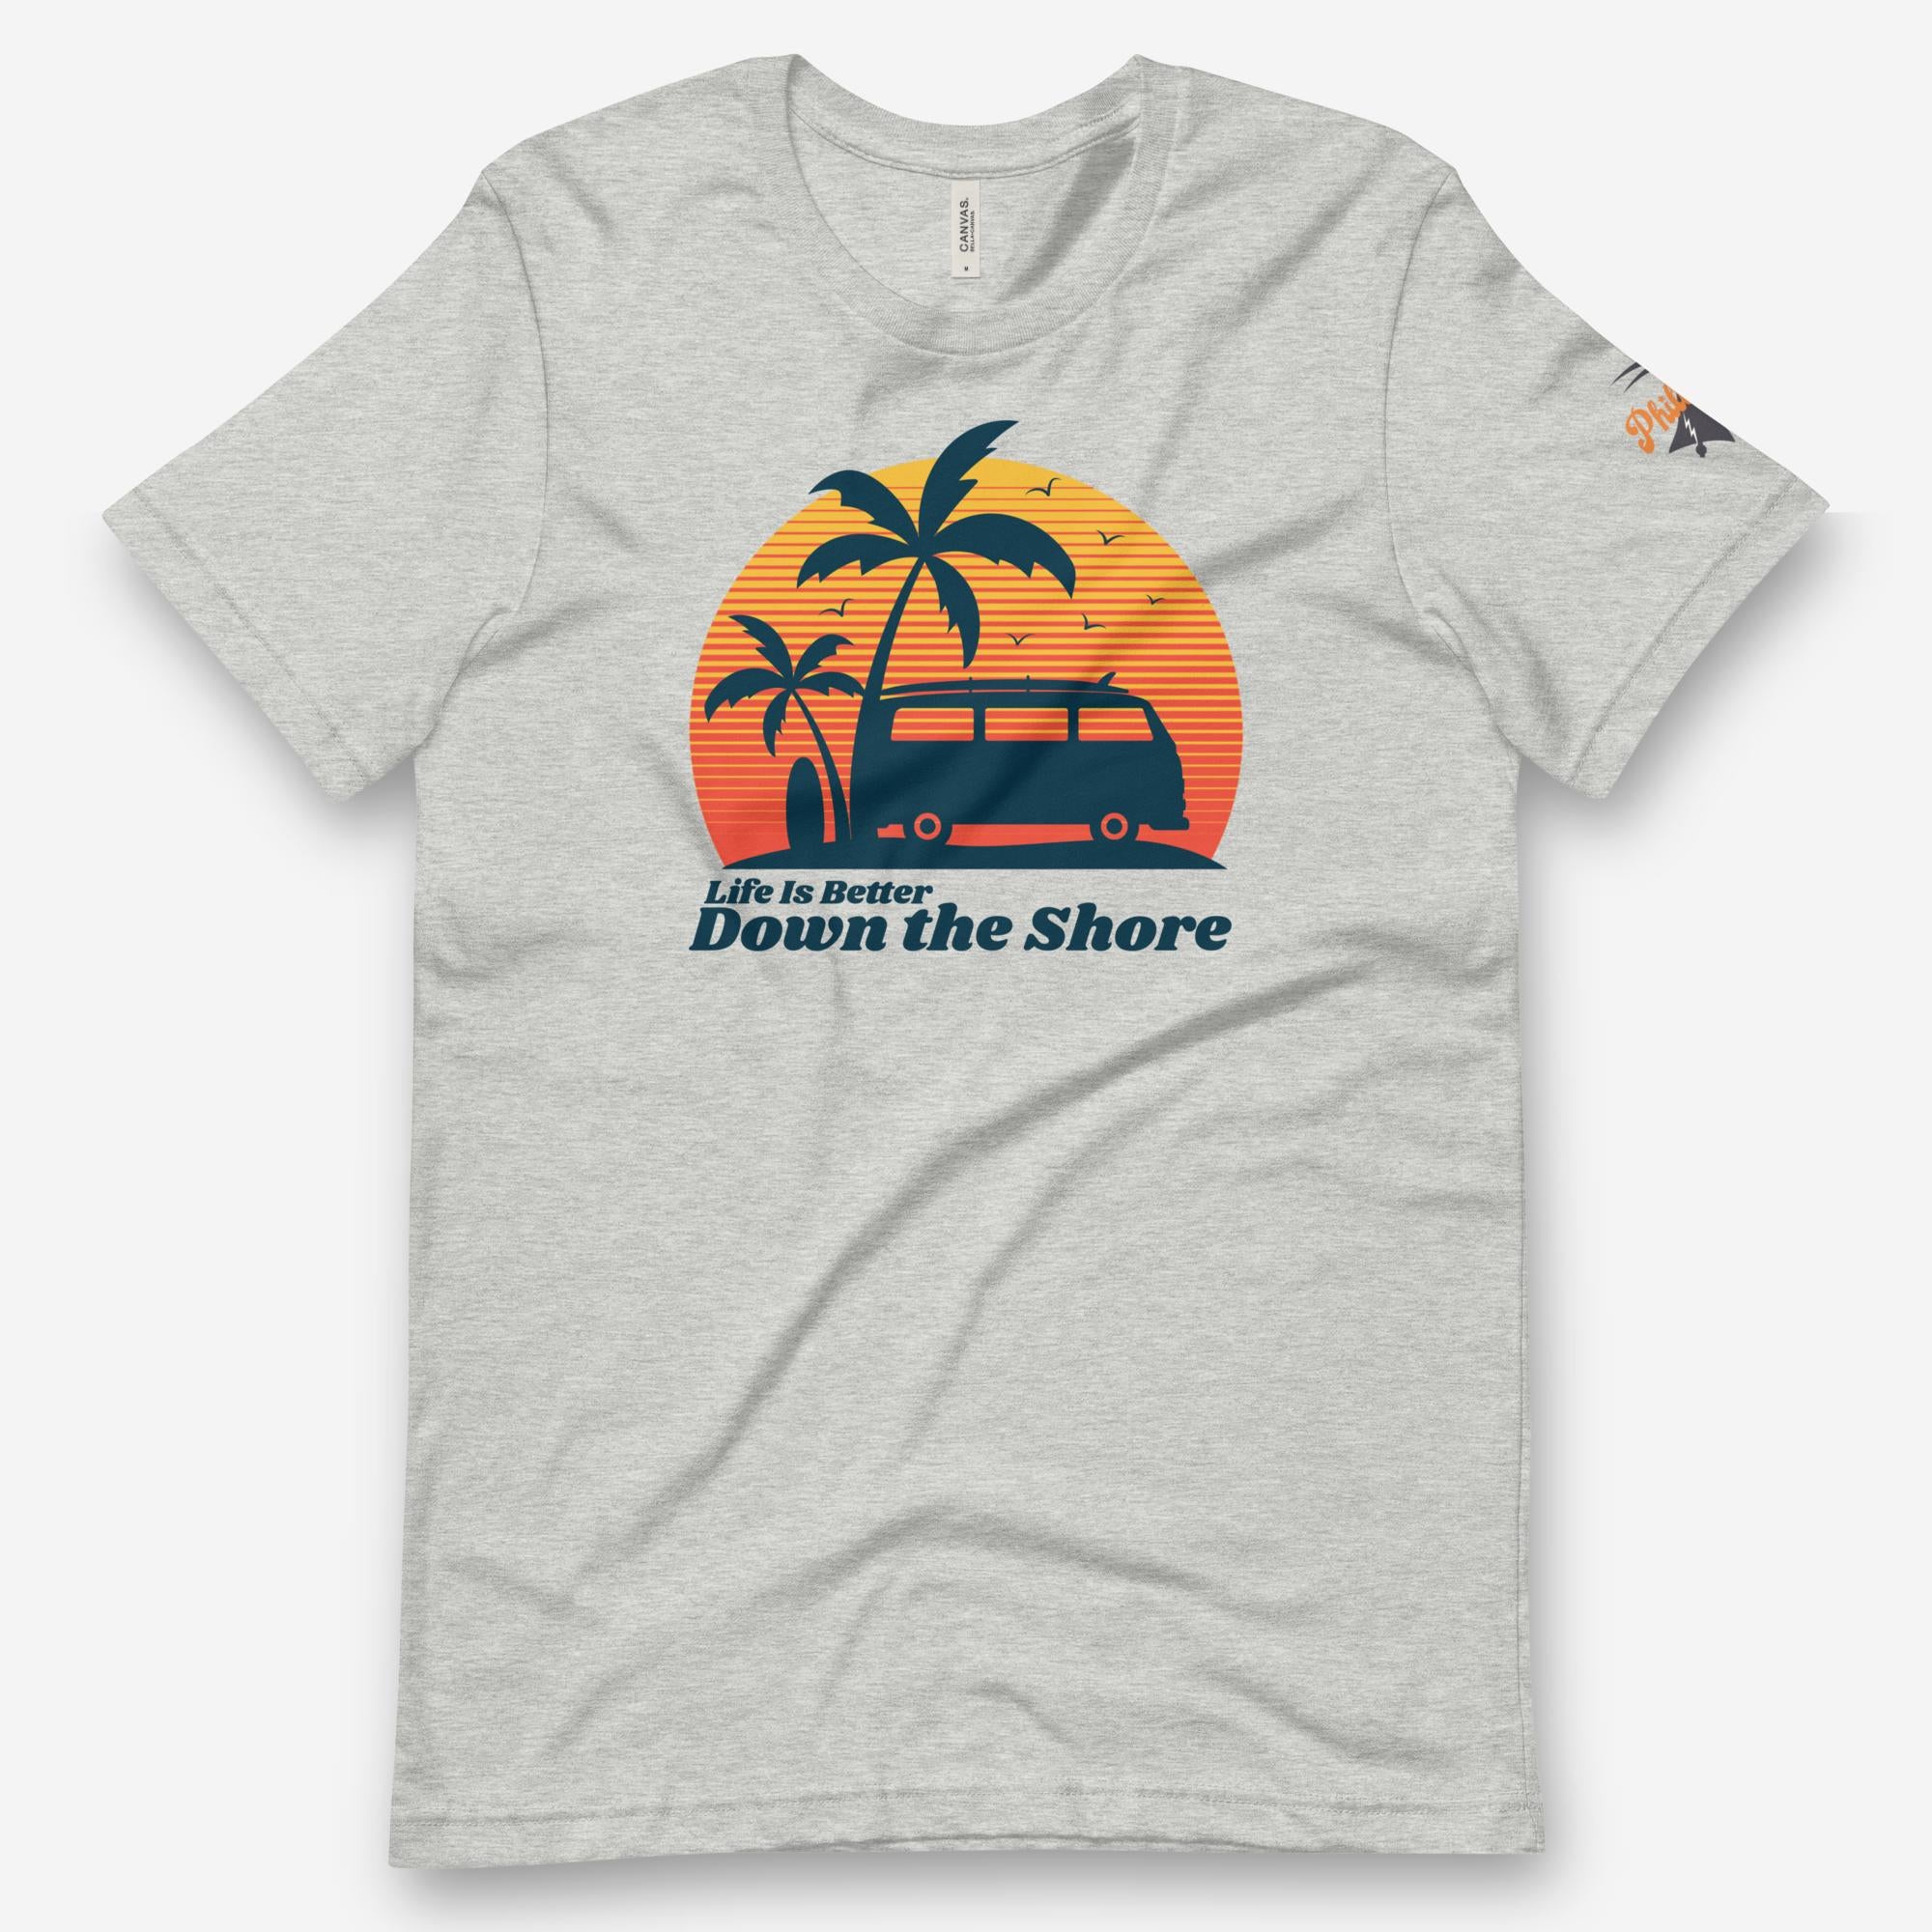 "Life Is Better Down the Shore" Tee